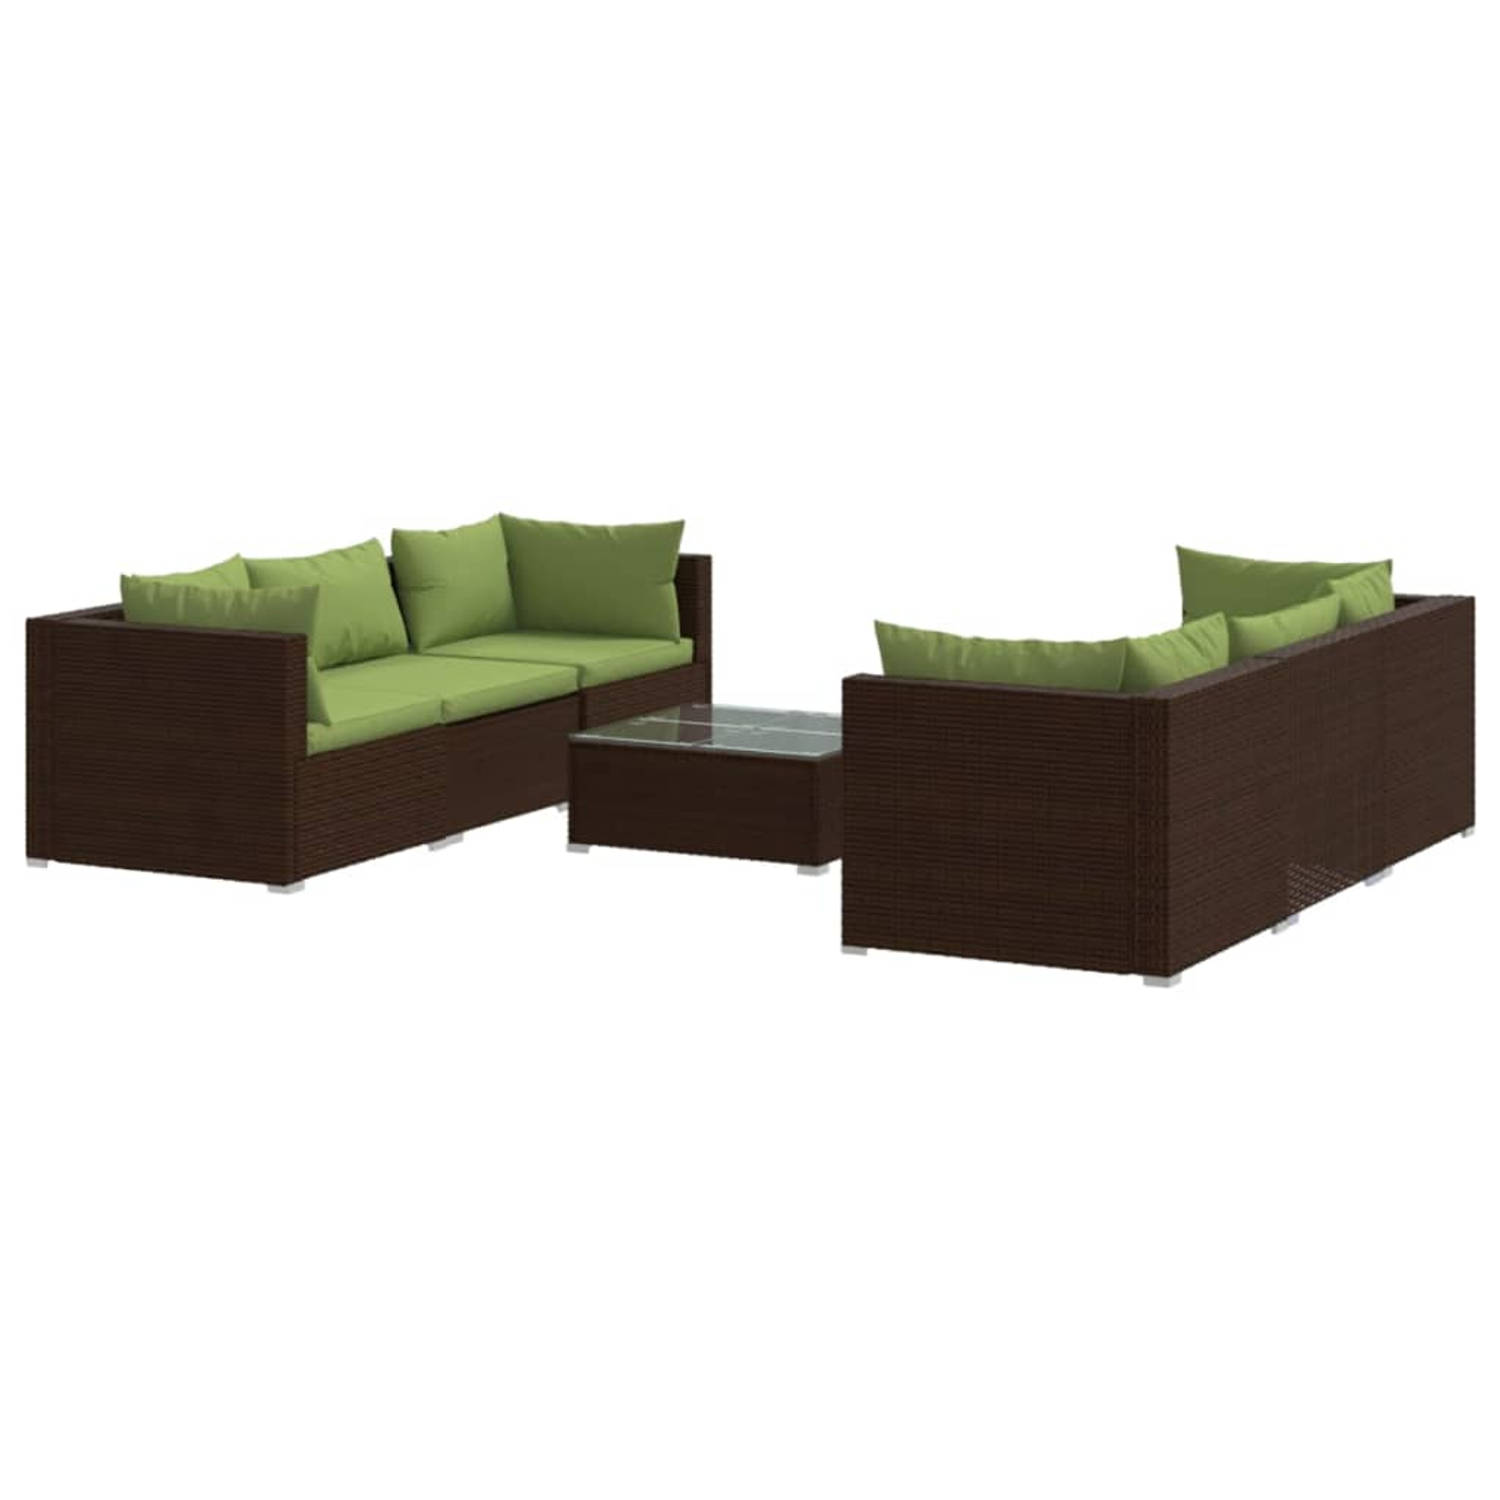 The Living Store Tuinset Poly Rattan - Modulair - Bruin - 60x60x30cm - Groene kussens